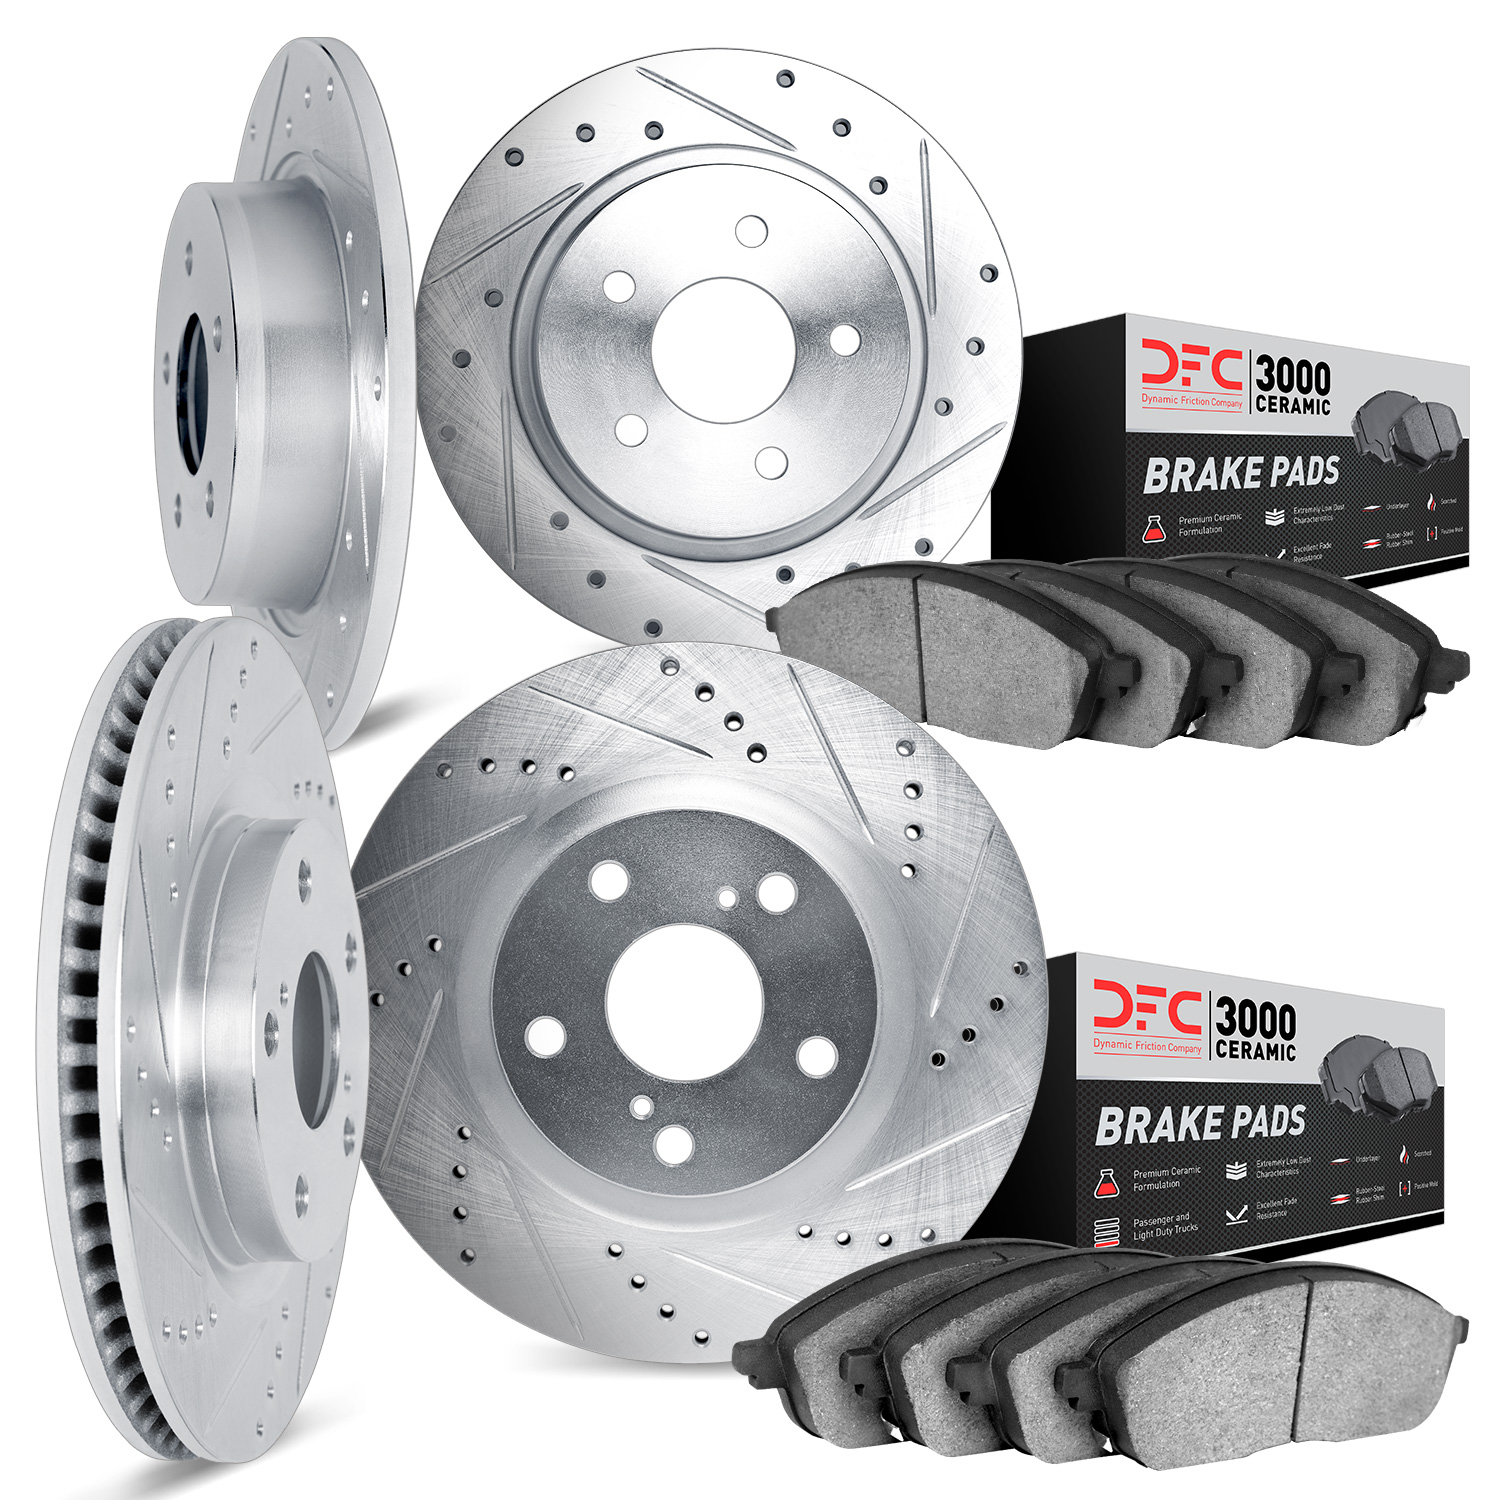 7304-54092 Drilled/Slotted Brake Rotor with 3000-Series Ceramic Brake Pads Kit [Silver], 2011-2019 Ford/Lincoln/Mercury/Mazda, P